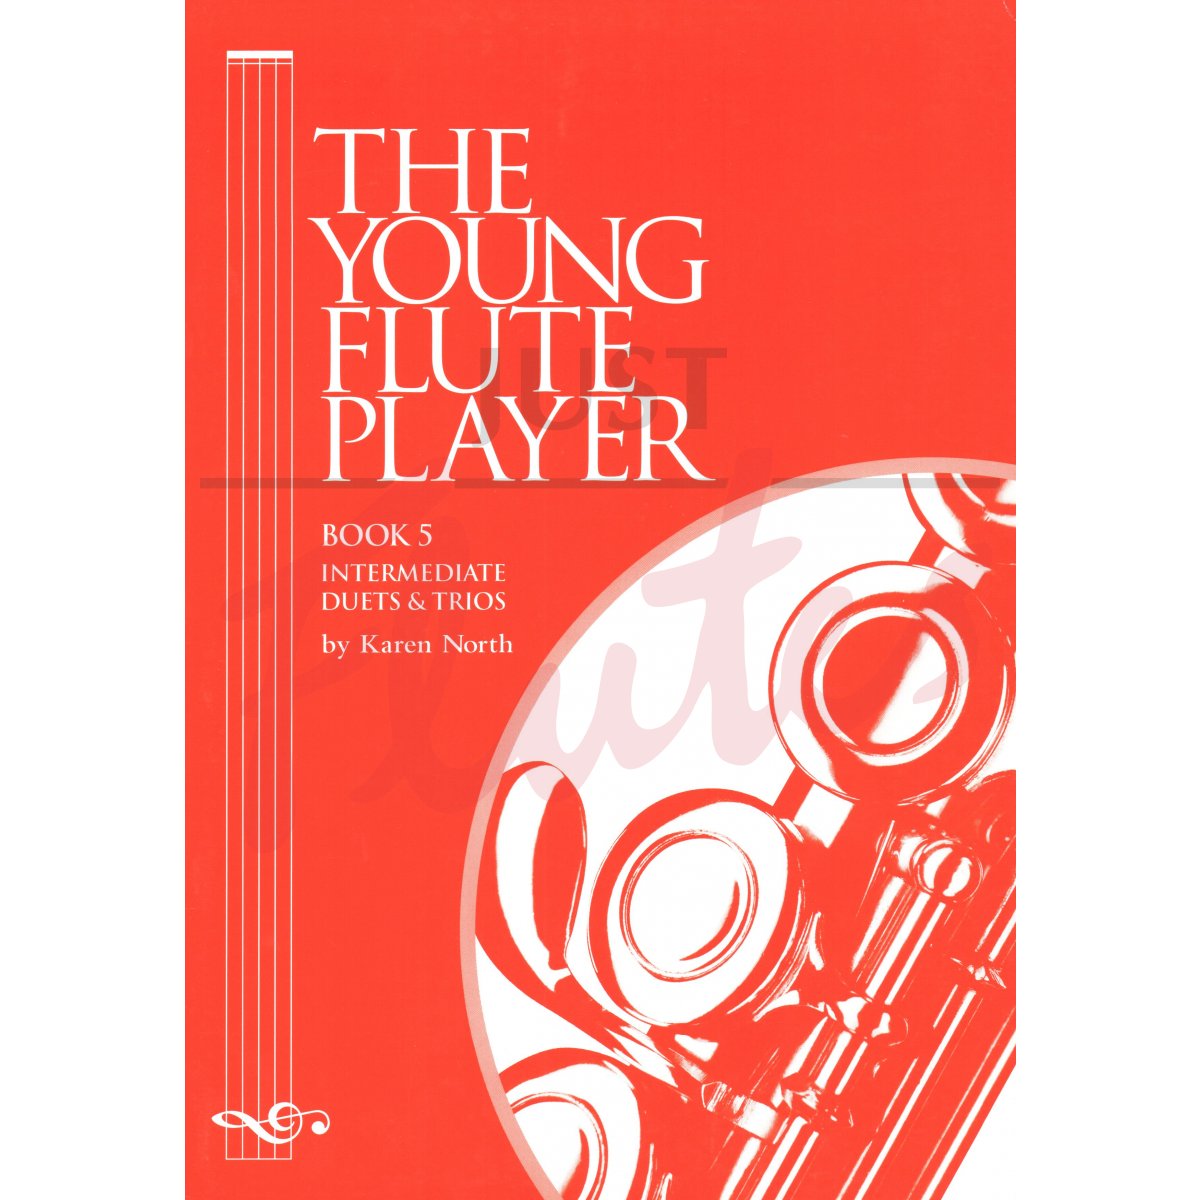 The Young Flute Player Book 5: Intermediate Duets and Trios